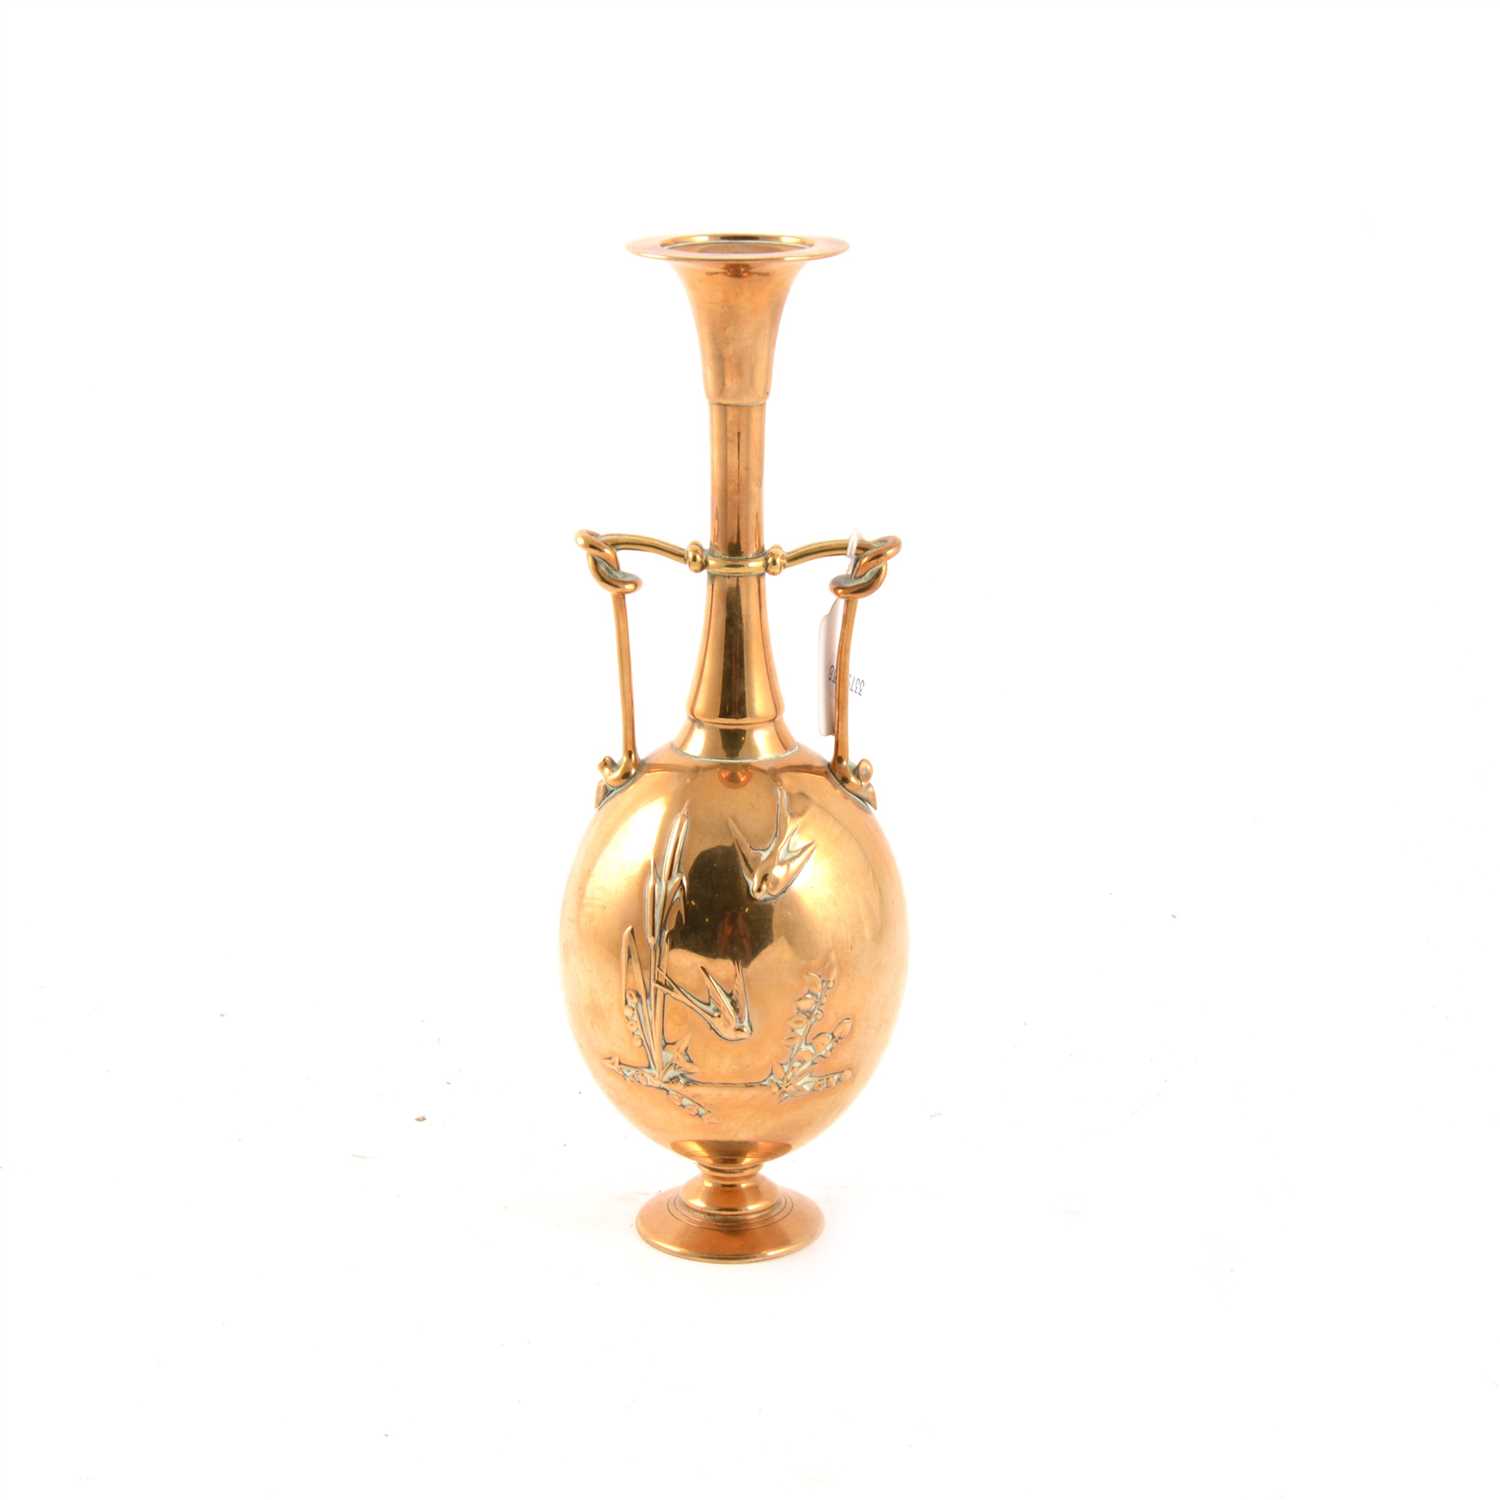 Lot 116 - A Japanese polished bronze two handled vase with relief decoration of flying birds, height 29cm.